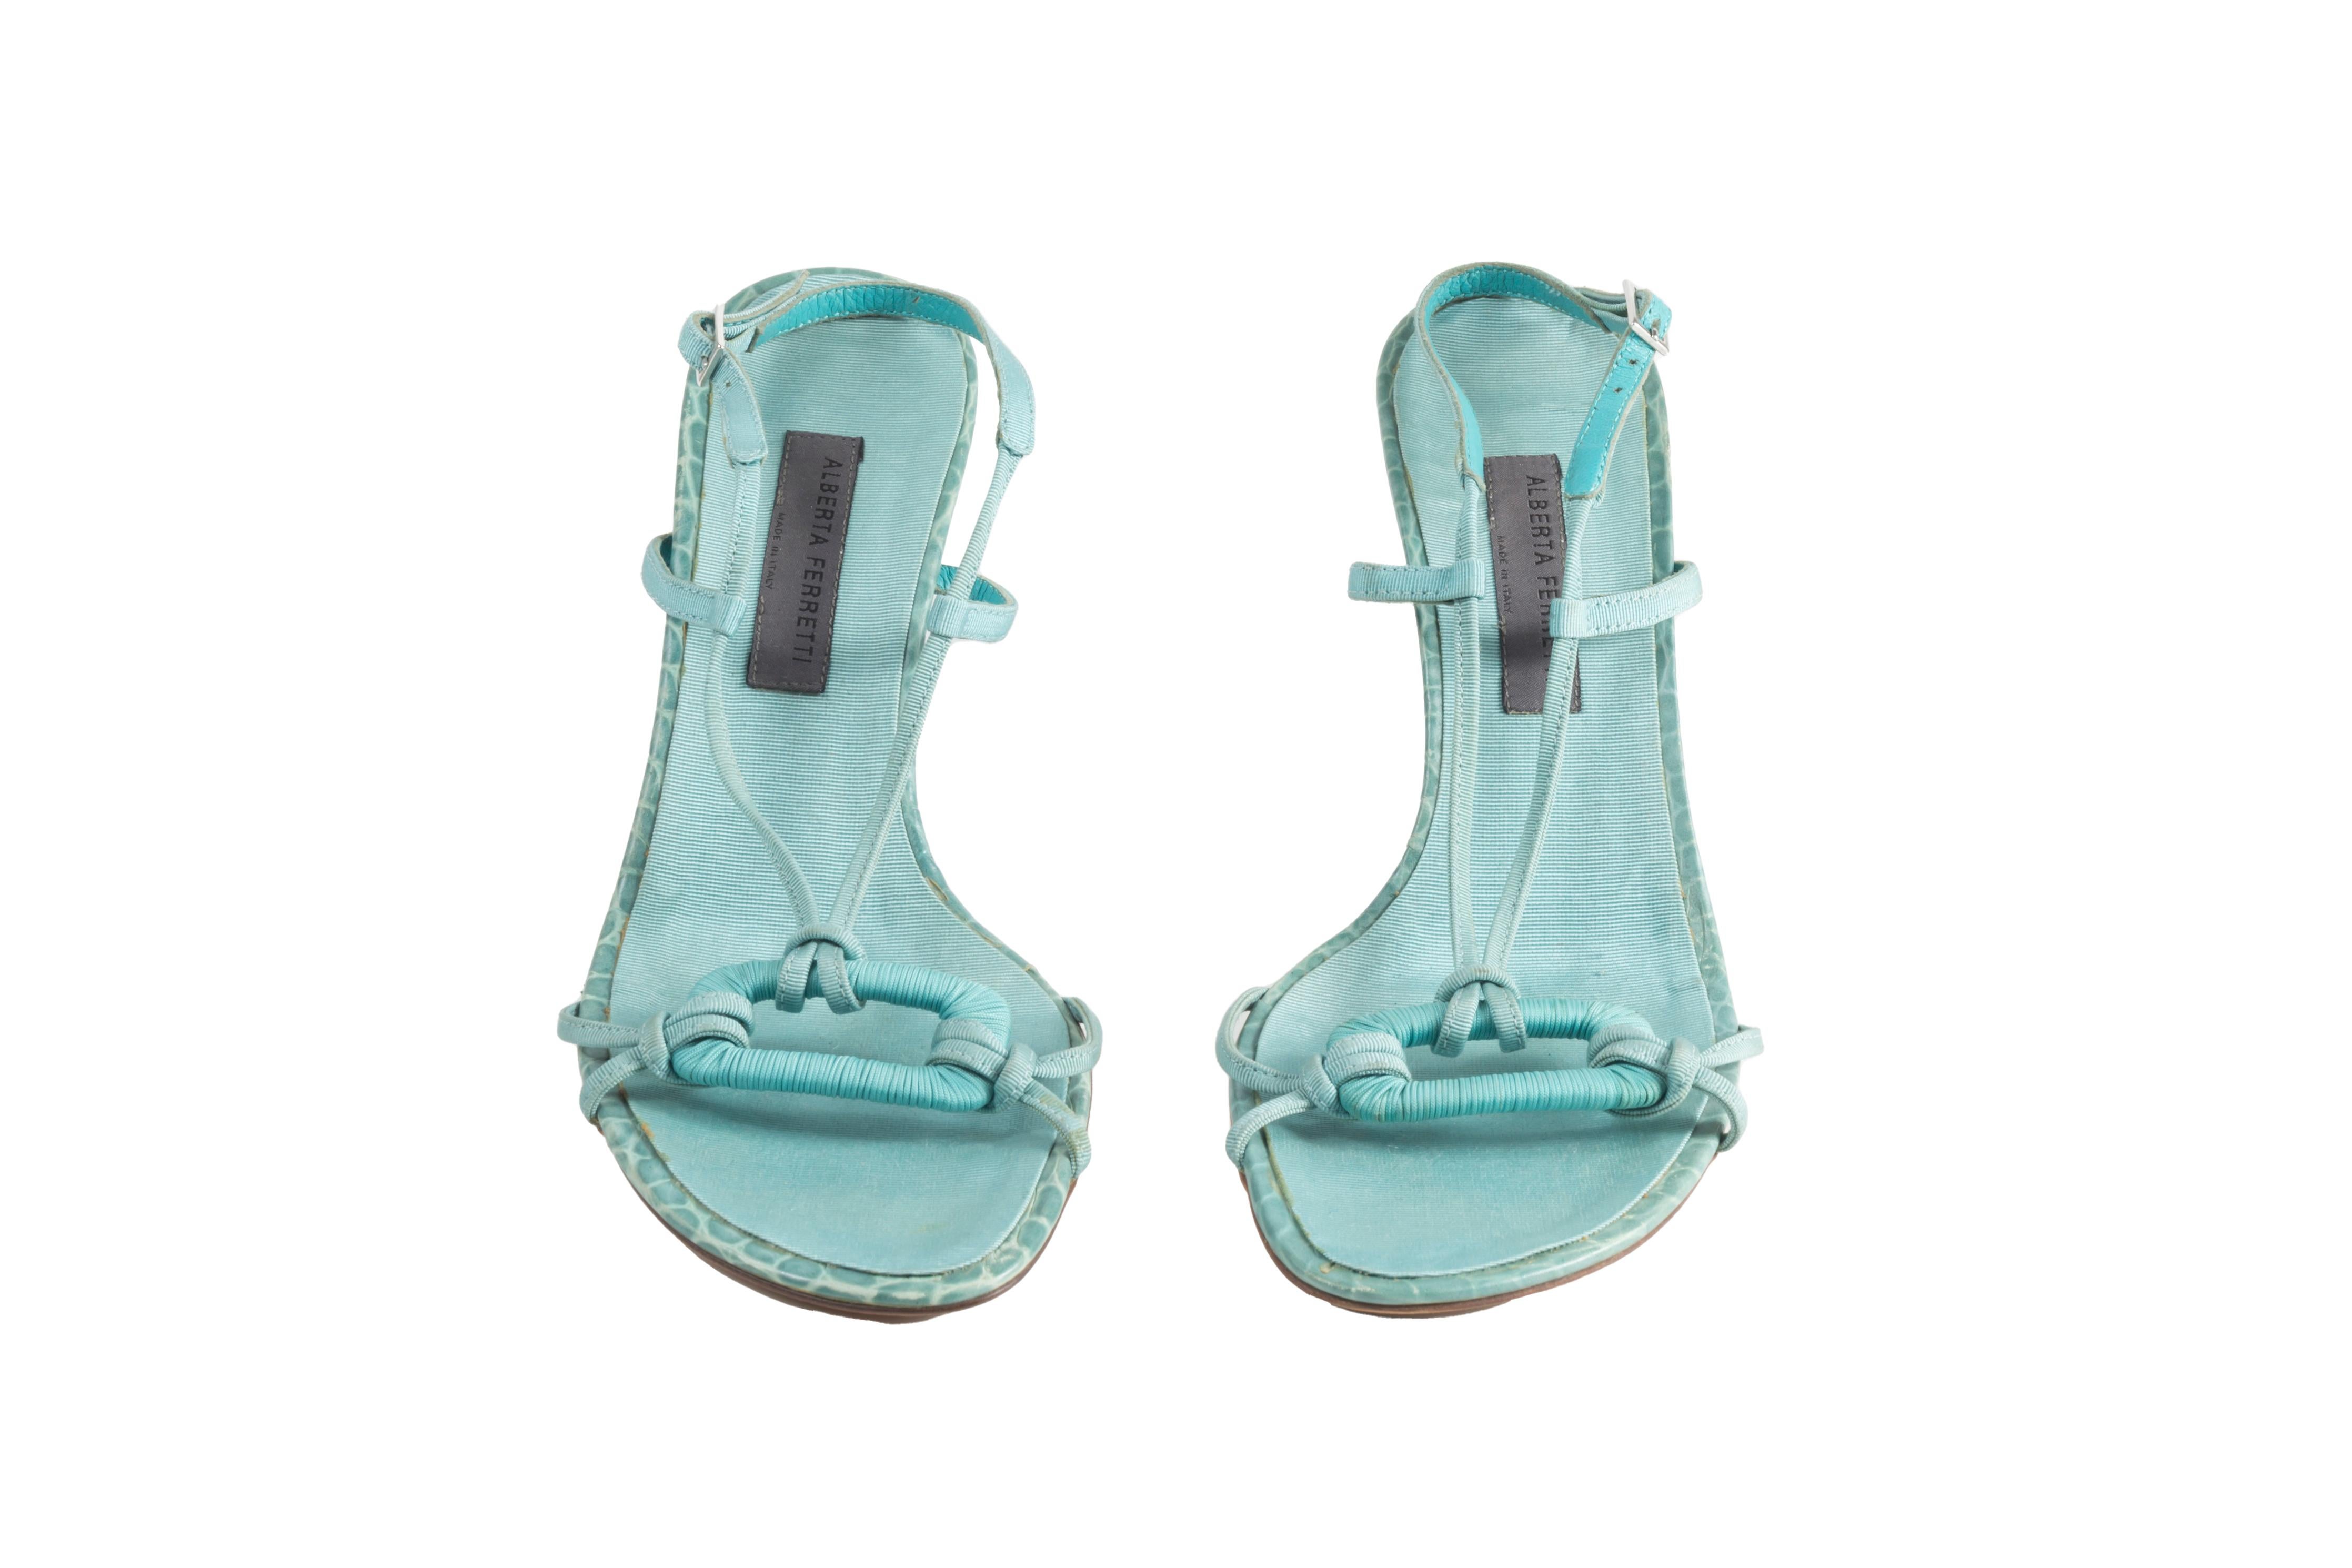 Alberta Ferretti S/S 2004 turquoise croc-embossed strappy sandals In Excellent Condition For Sale In Rome, IT